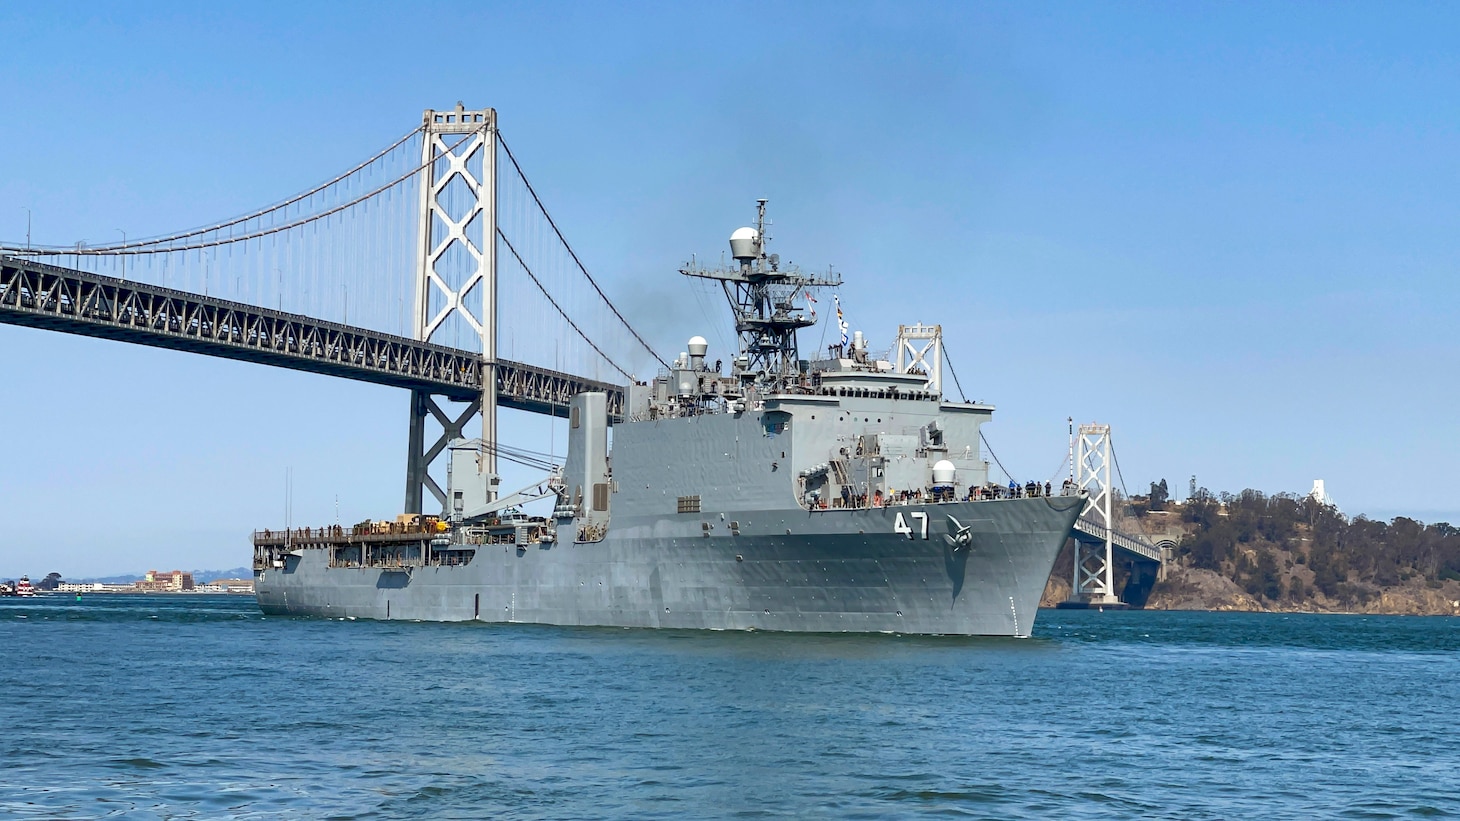 SAN FRANCISCO (Oct. 4, 2021) Whidbey Island-class amphibious dock landing ship USS Rushmore (LSD 47) crosses under the San Francisco-Oakland Bay Bridge arriving in San Francisco in support of San Francisco Fleet Week (SFFW) 2021. SFFW is an opportunity for the American public to meet their Navy, Marine Corps and Coast Guard teams and experience America's sea services. During fleet week, service members participate in various community service events, showcase capabilities and equipment to the community, and enjoy the hospitality of the city and its surrounding areas. (U.S. Navy photo by Mass Communication Specialist 2nd Class Jasen Moreno-Garcia/Released)